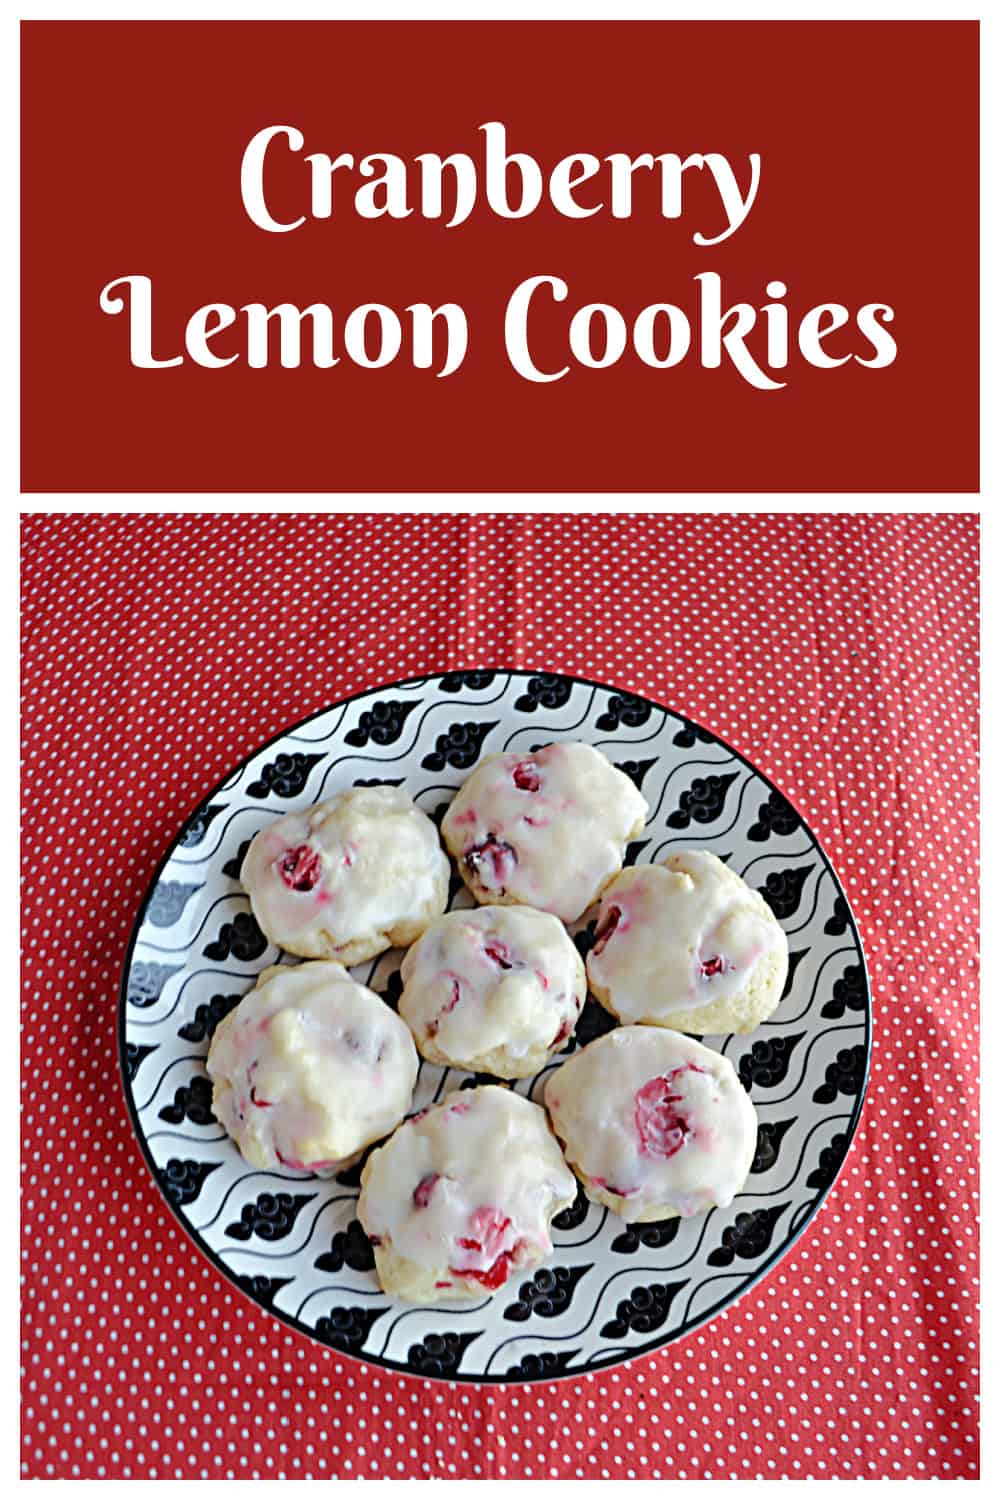 Pin Image: Text title, a plate of Cranberry Lemon Cookies.